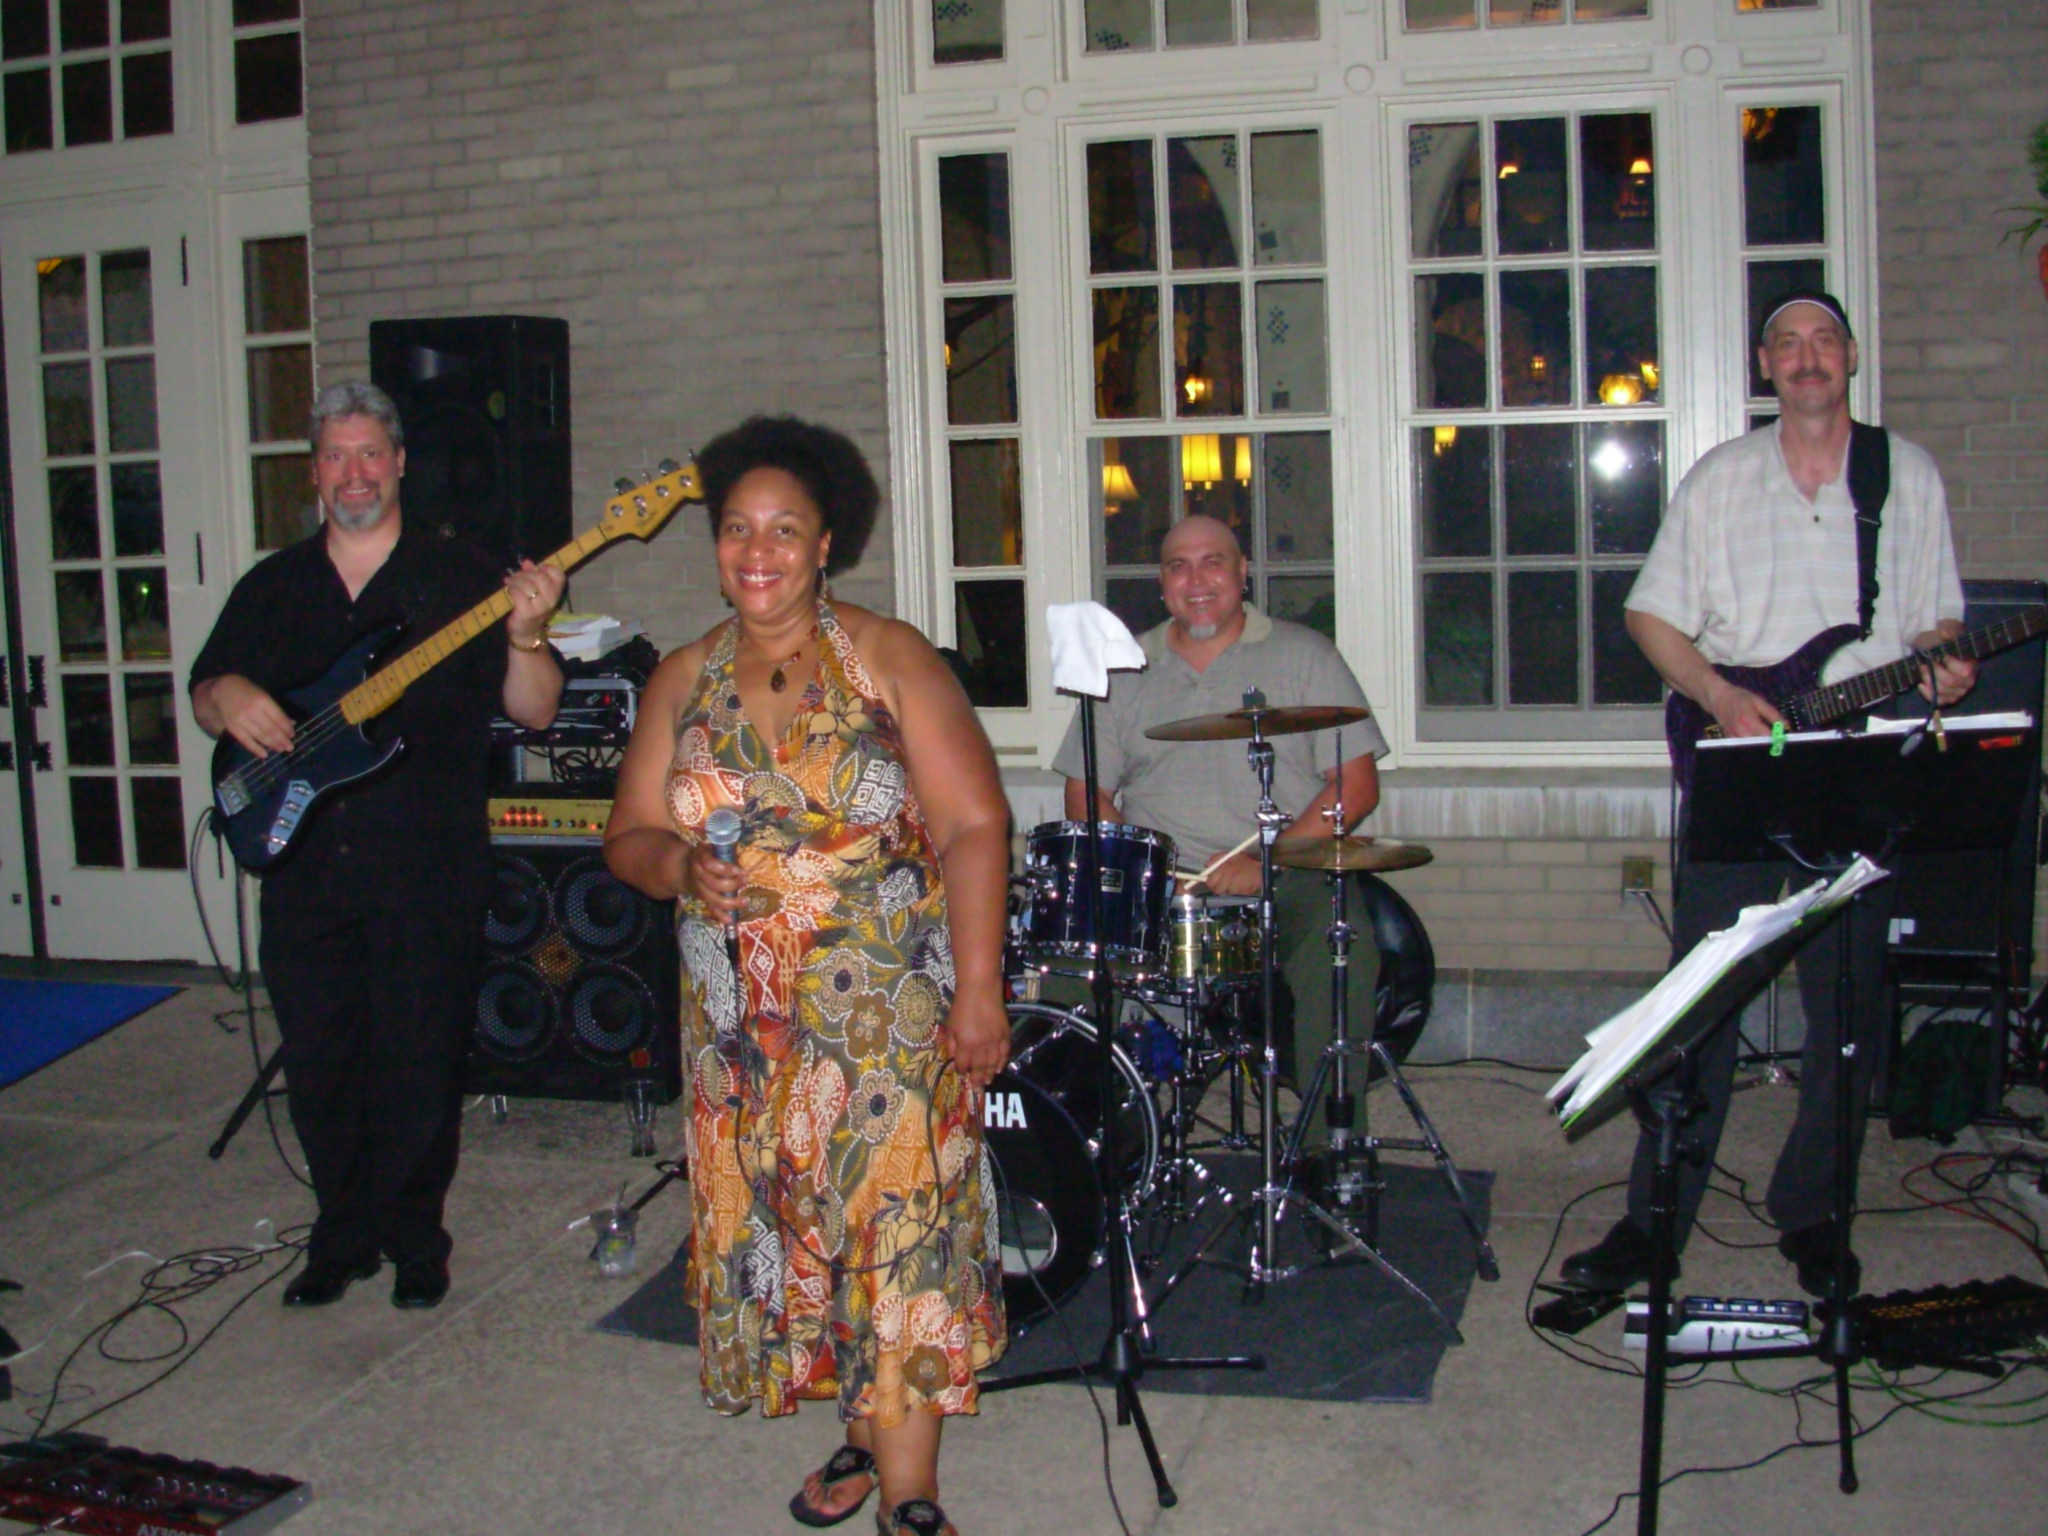 Rose Hudson and her band at the Veranda in Hershey...
we play many of the same venues
